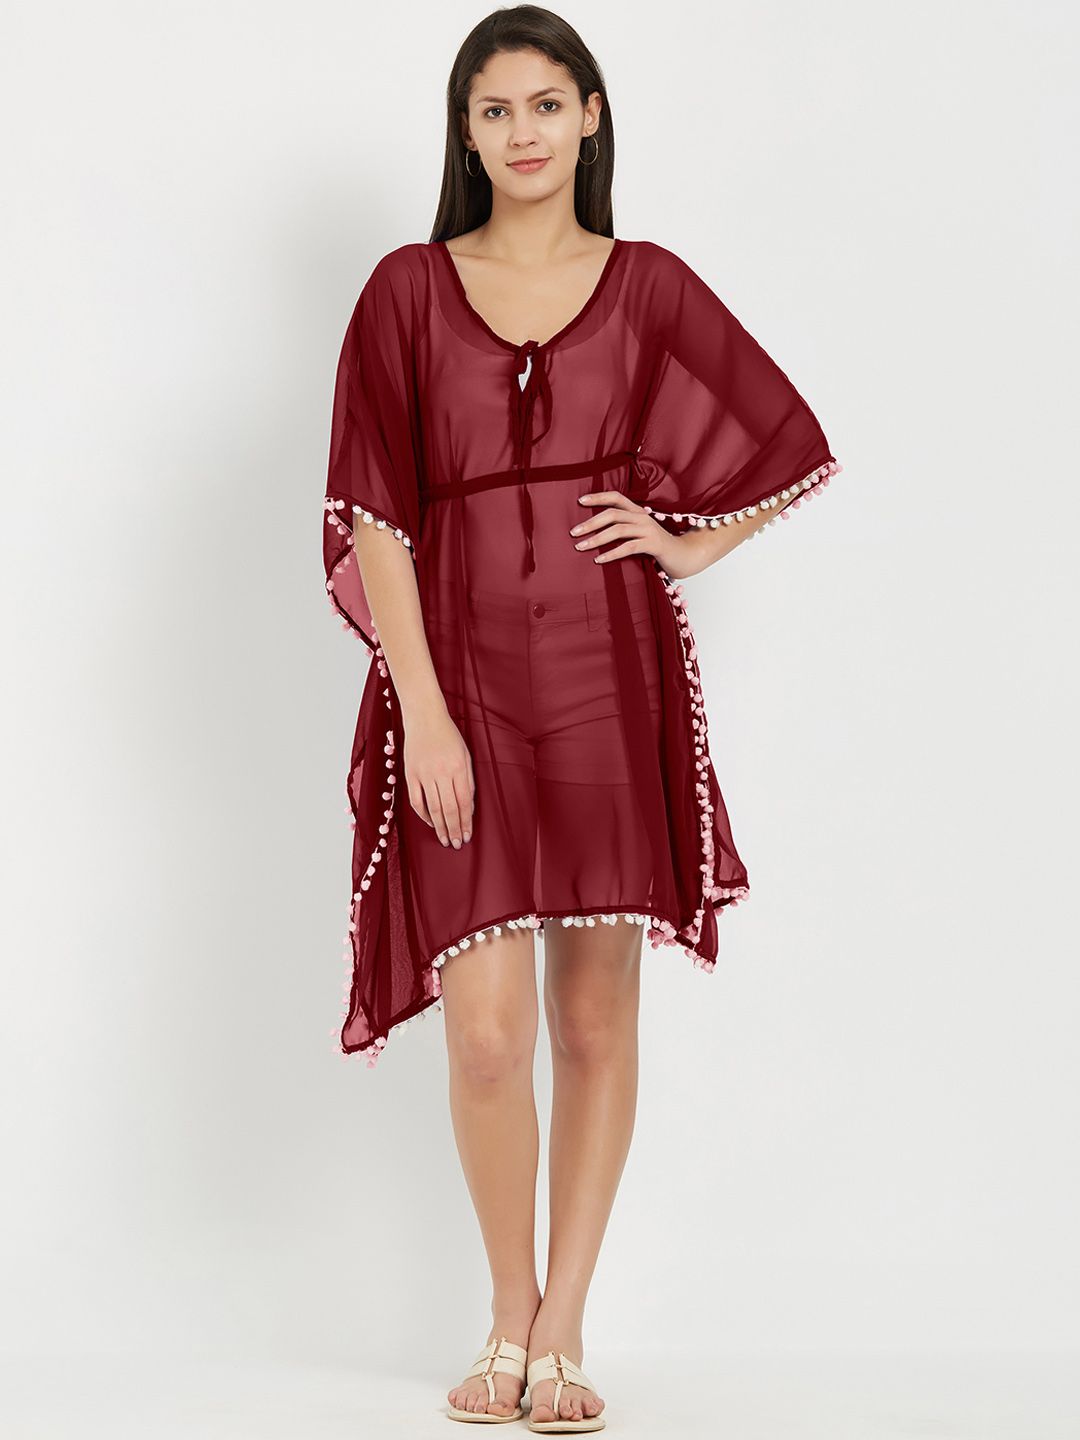 MIRCHI FASHION Women Maroon Solid Kaftan Cover-Up Dress Price in India